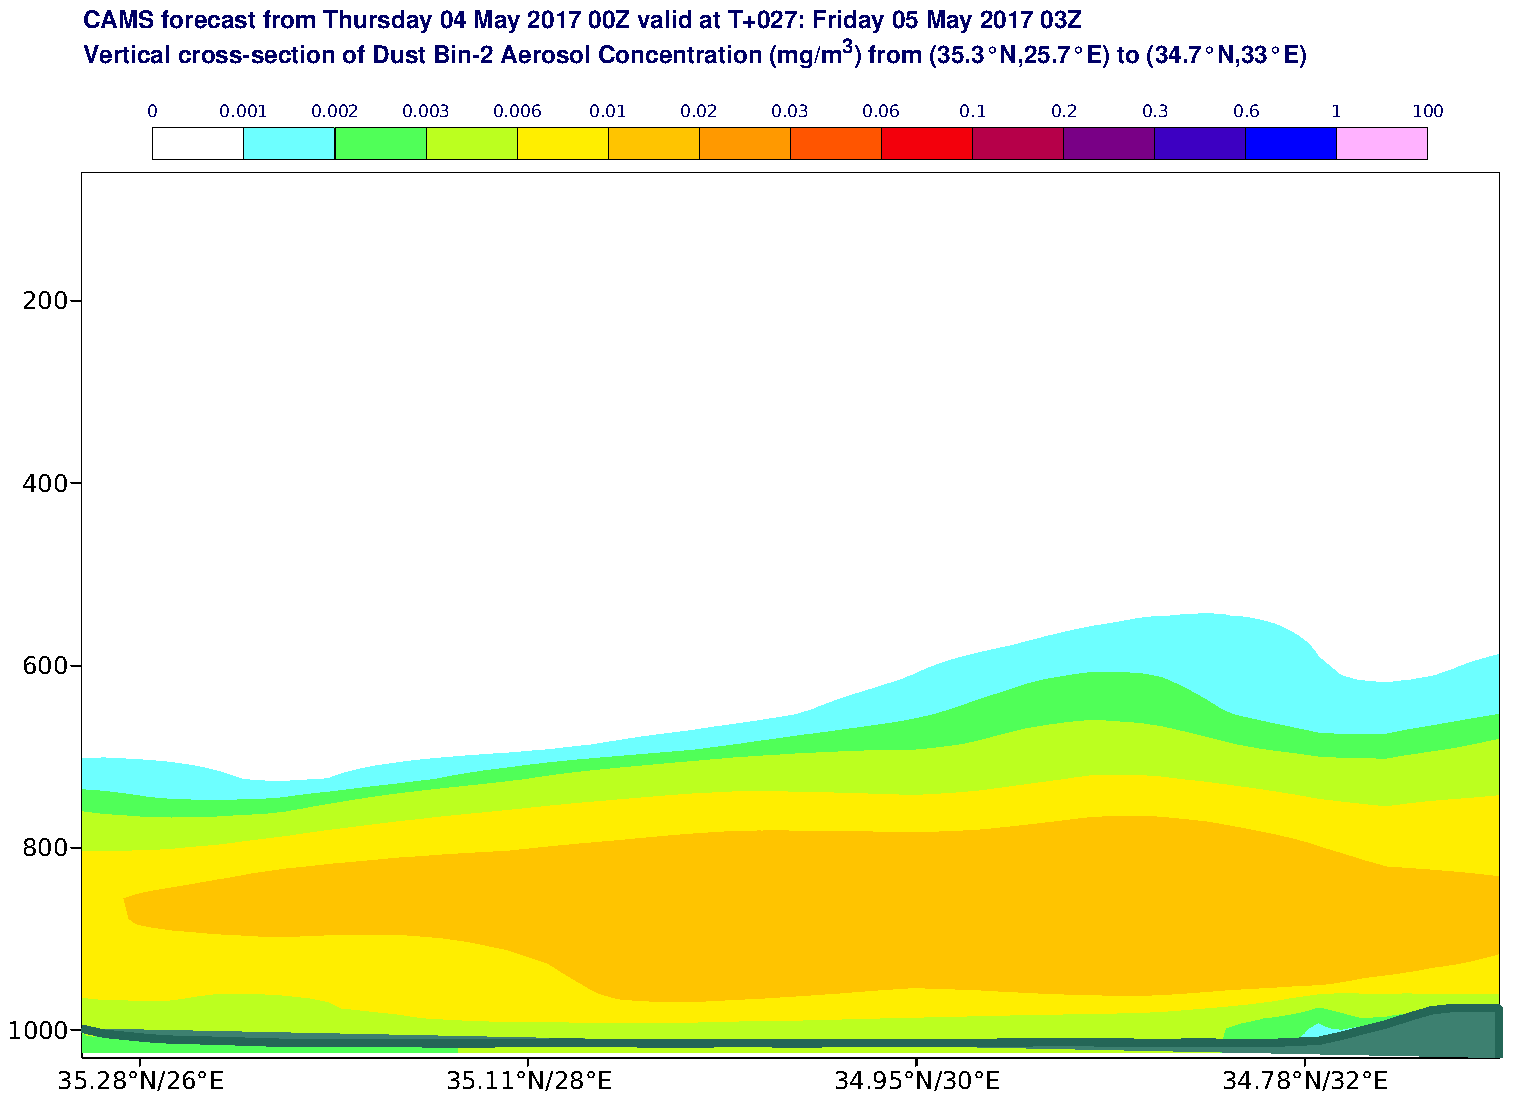 Vertical cross-section of Dust Bin-2 Aerosol Concentration (mg/m3) valid at T27 - 2017-05-05 03:00